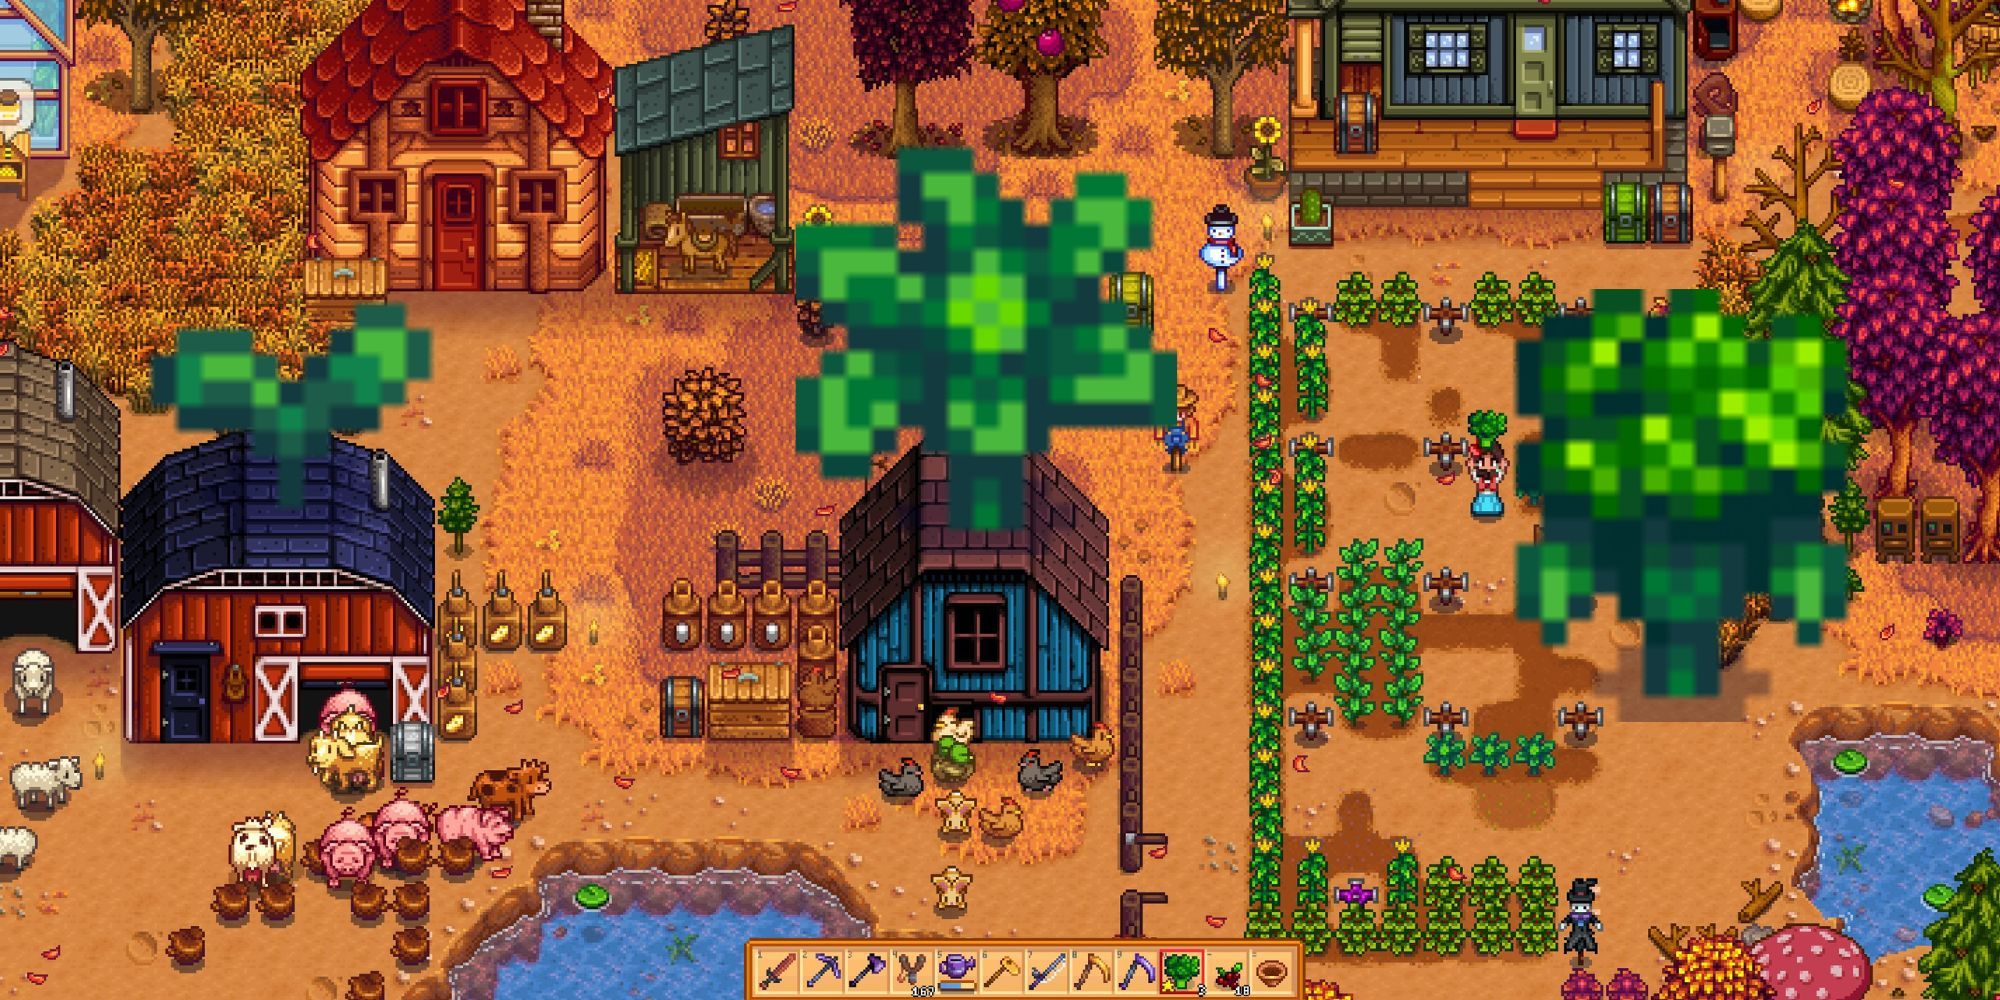 Stardew Valley: Three stages of Broccoli over an image of the player's farm in autumn